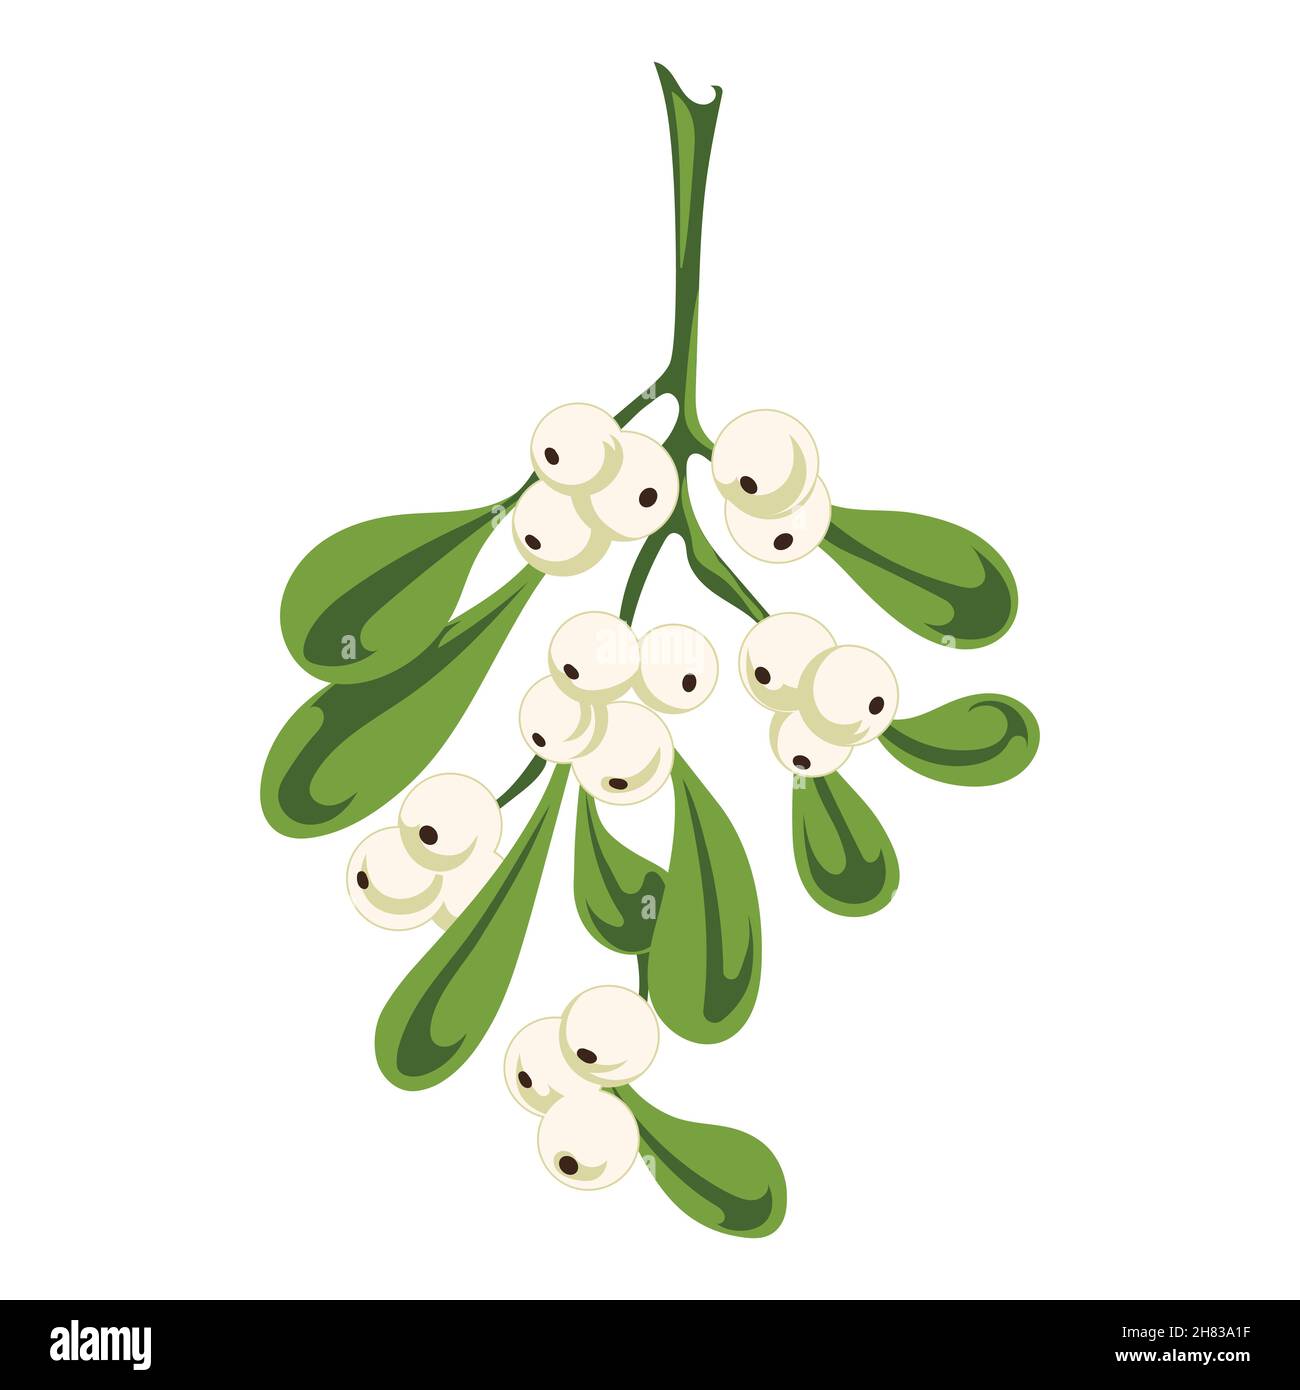 Mistletoe branch with berries and leaves in vintage style Stock Vector